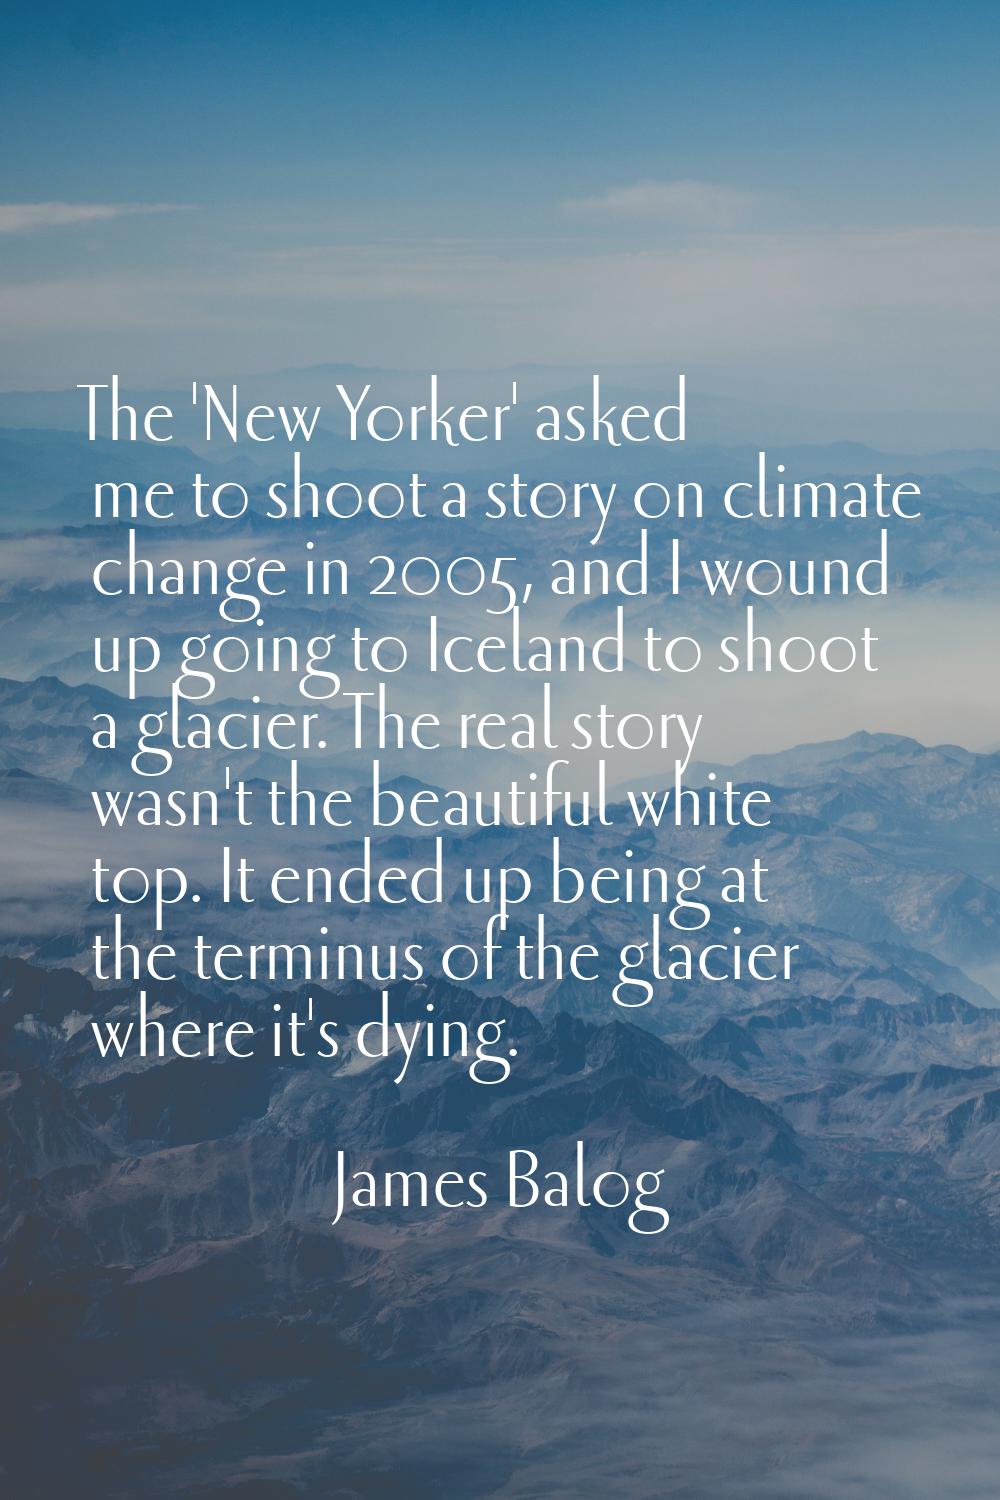 The 'New Yorker' asked me to shoot a story on climate change in 2005, and I wound up going to Icela